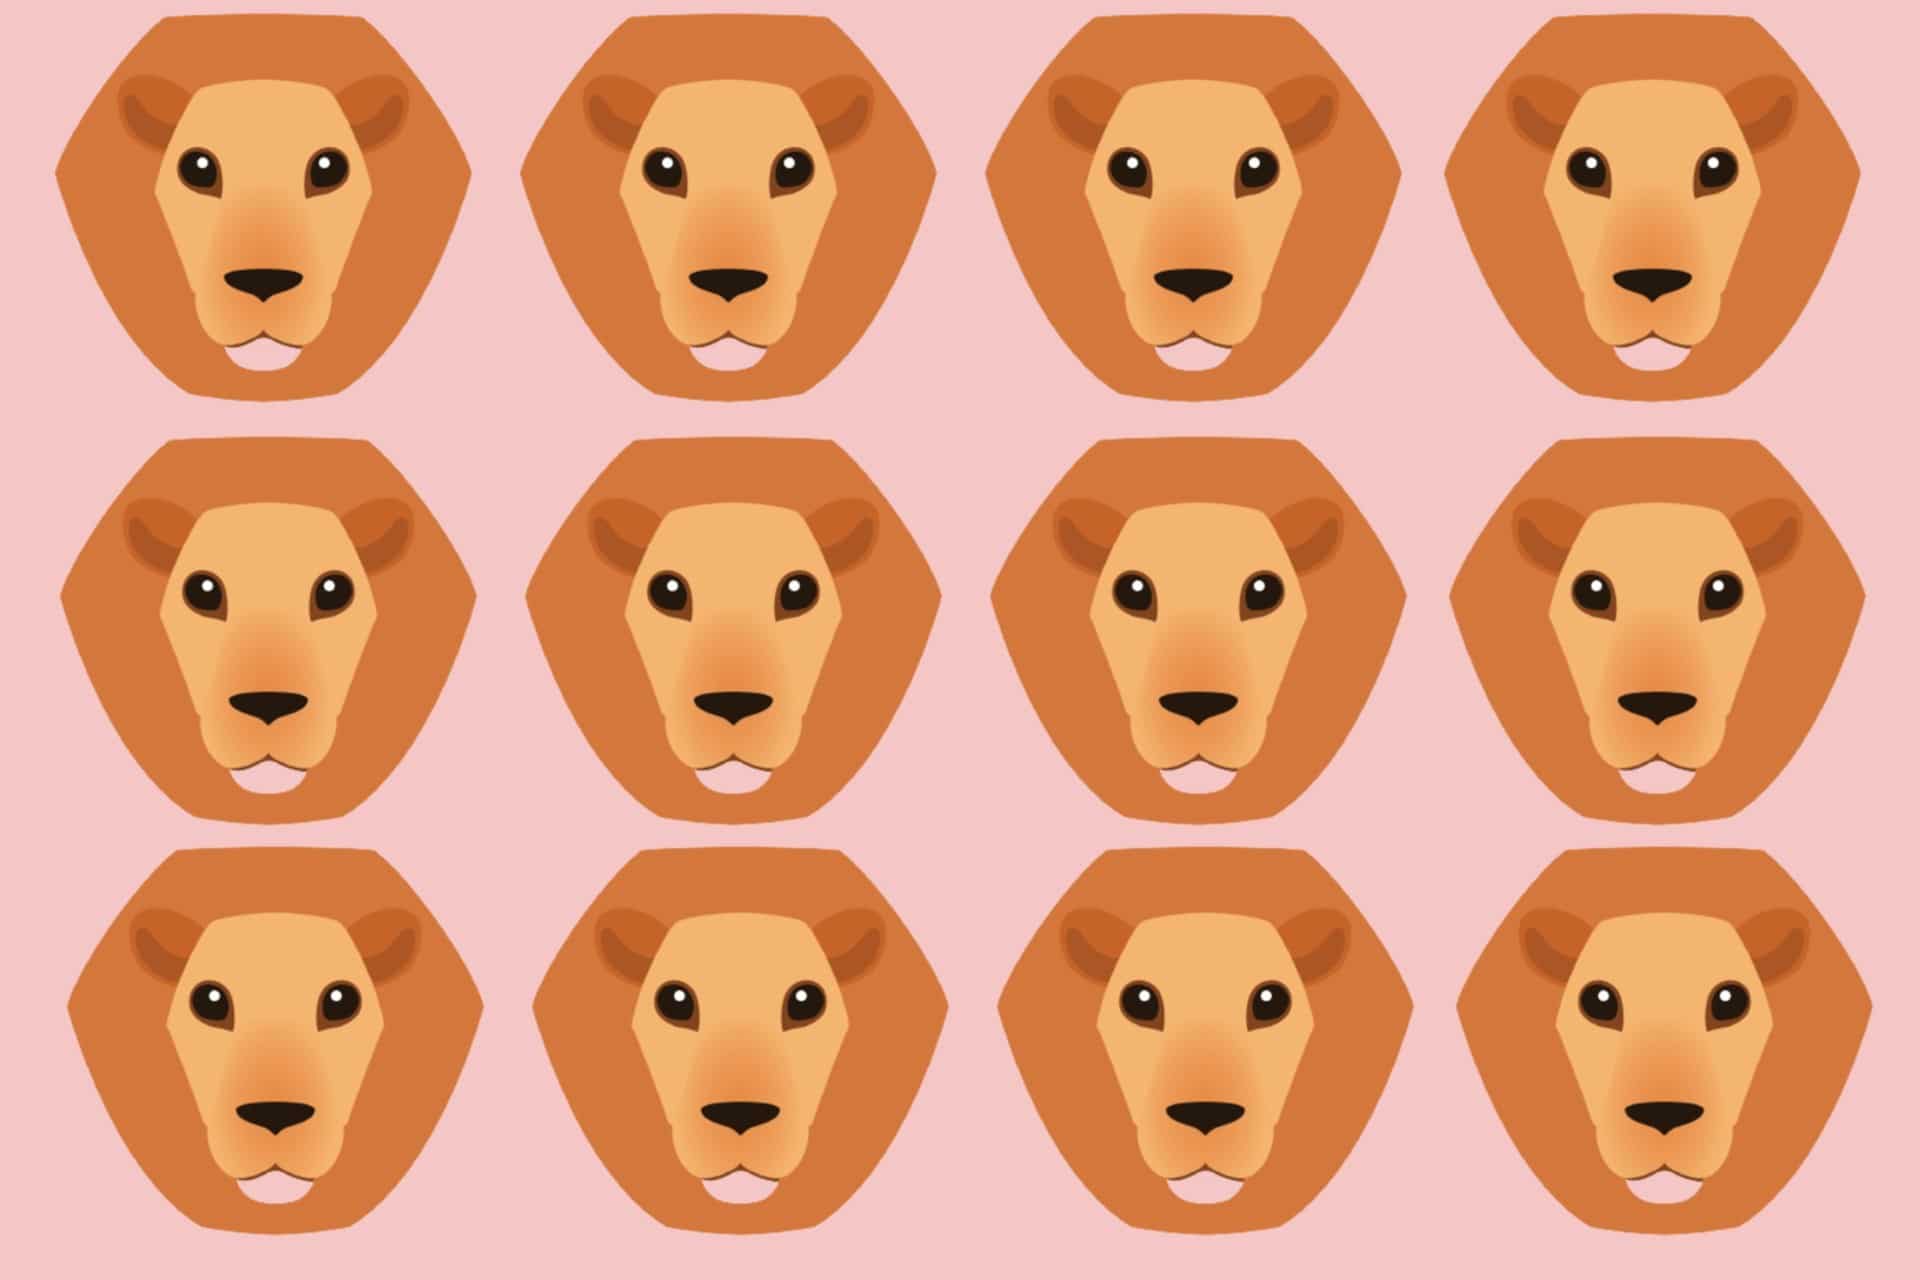 astrology for kids illustrated lions on a pink background to represent Leo zodiac sign